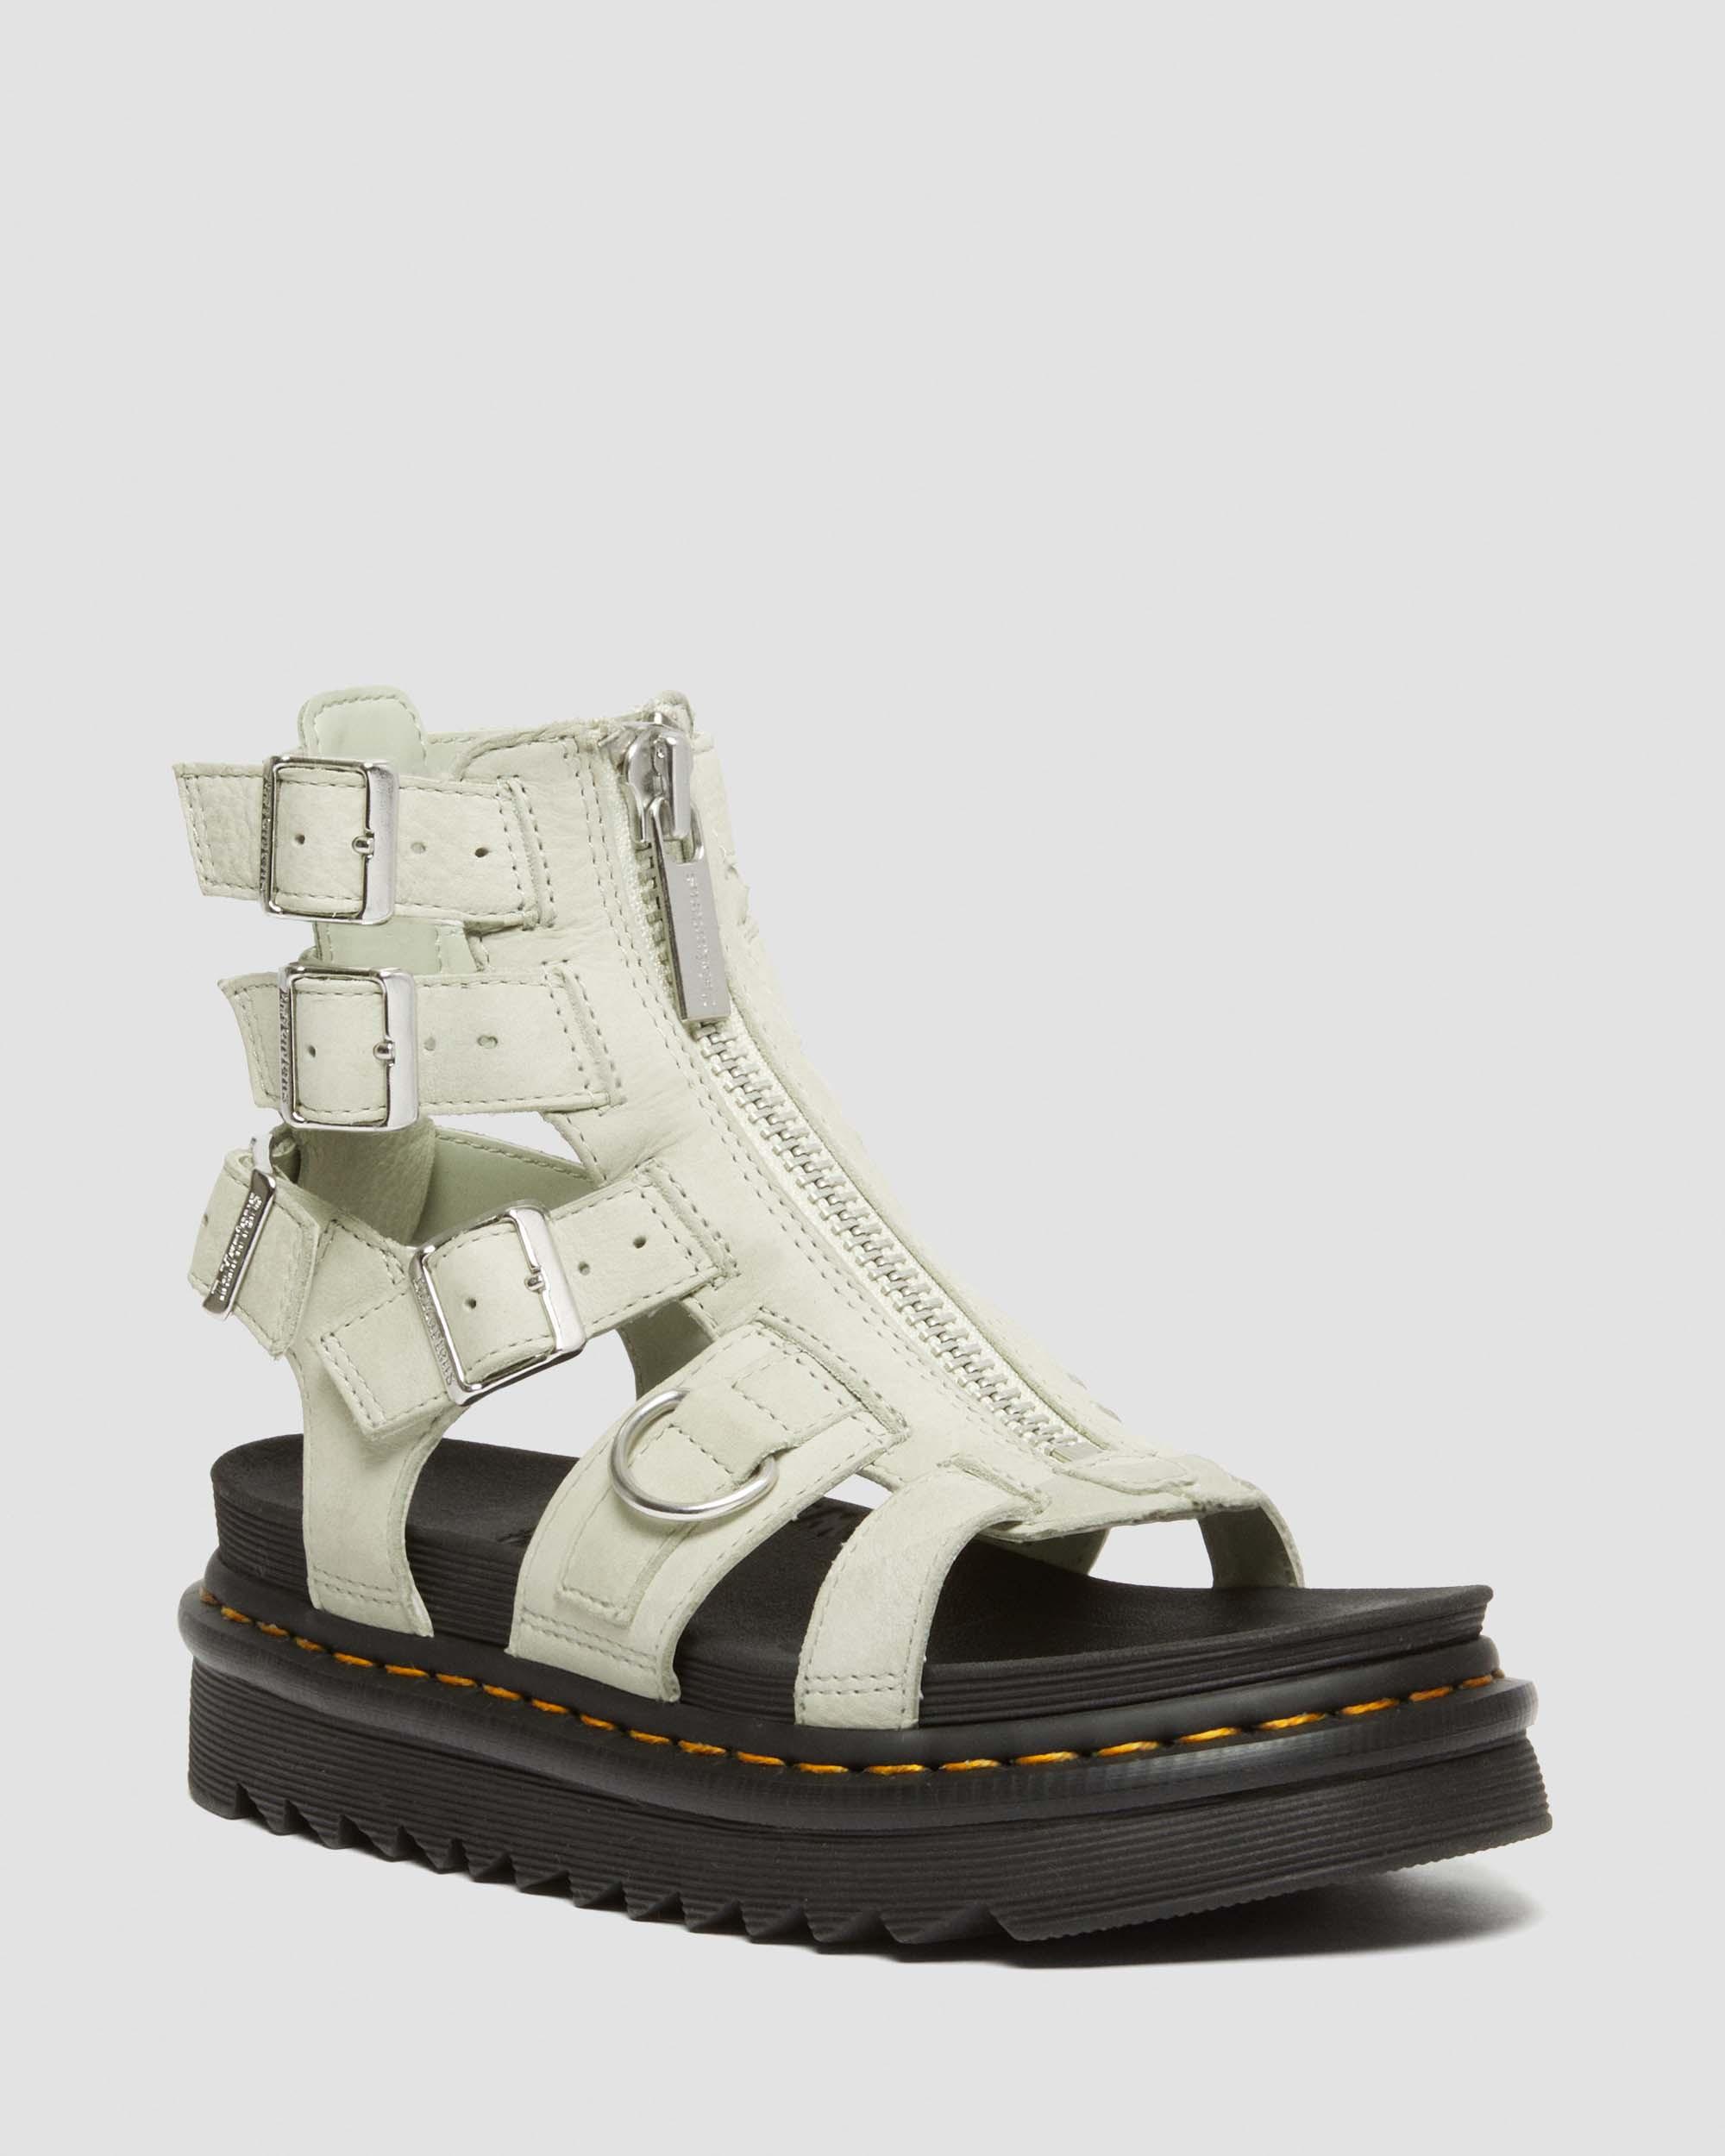 Dr. Martens' Olson Tumbled Nubuck Leather Gladiator Zip Sandals In Cream,green